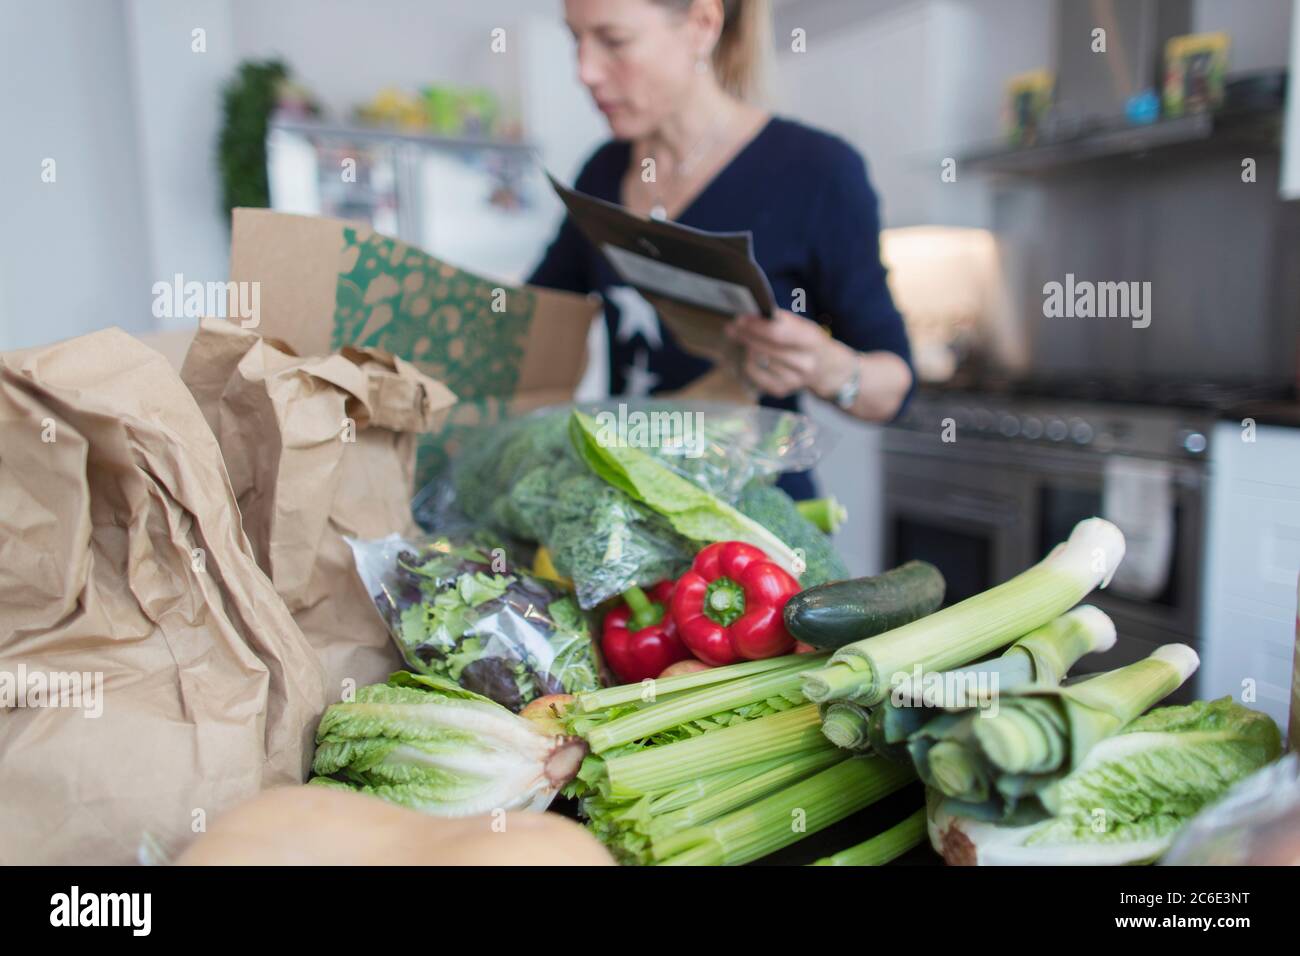 Woman unloading fresh produce from box in kitchen Stock Photo